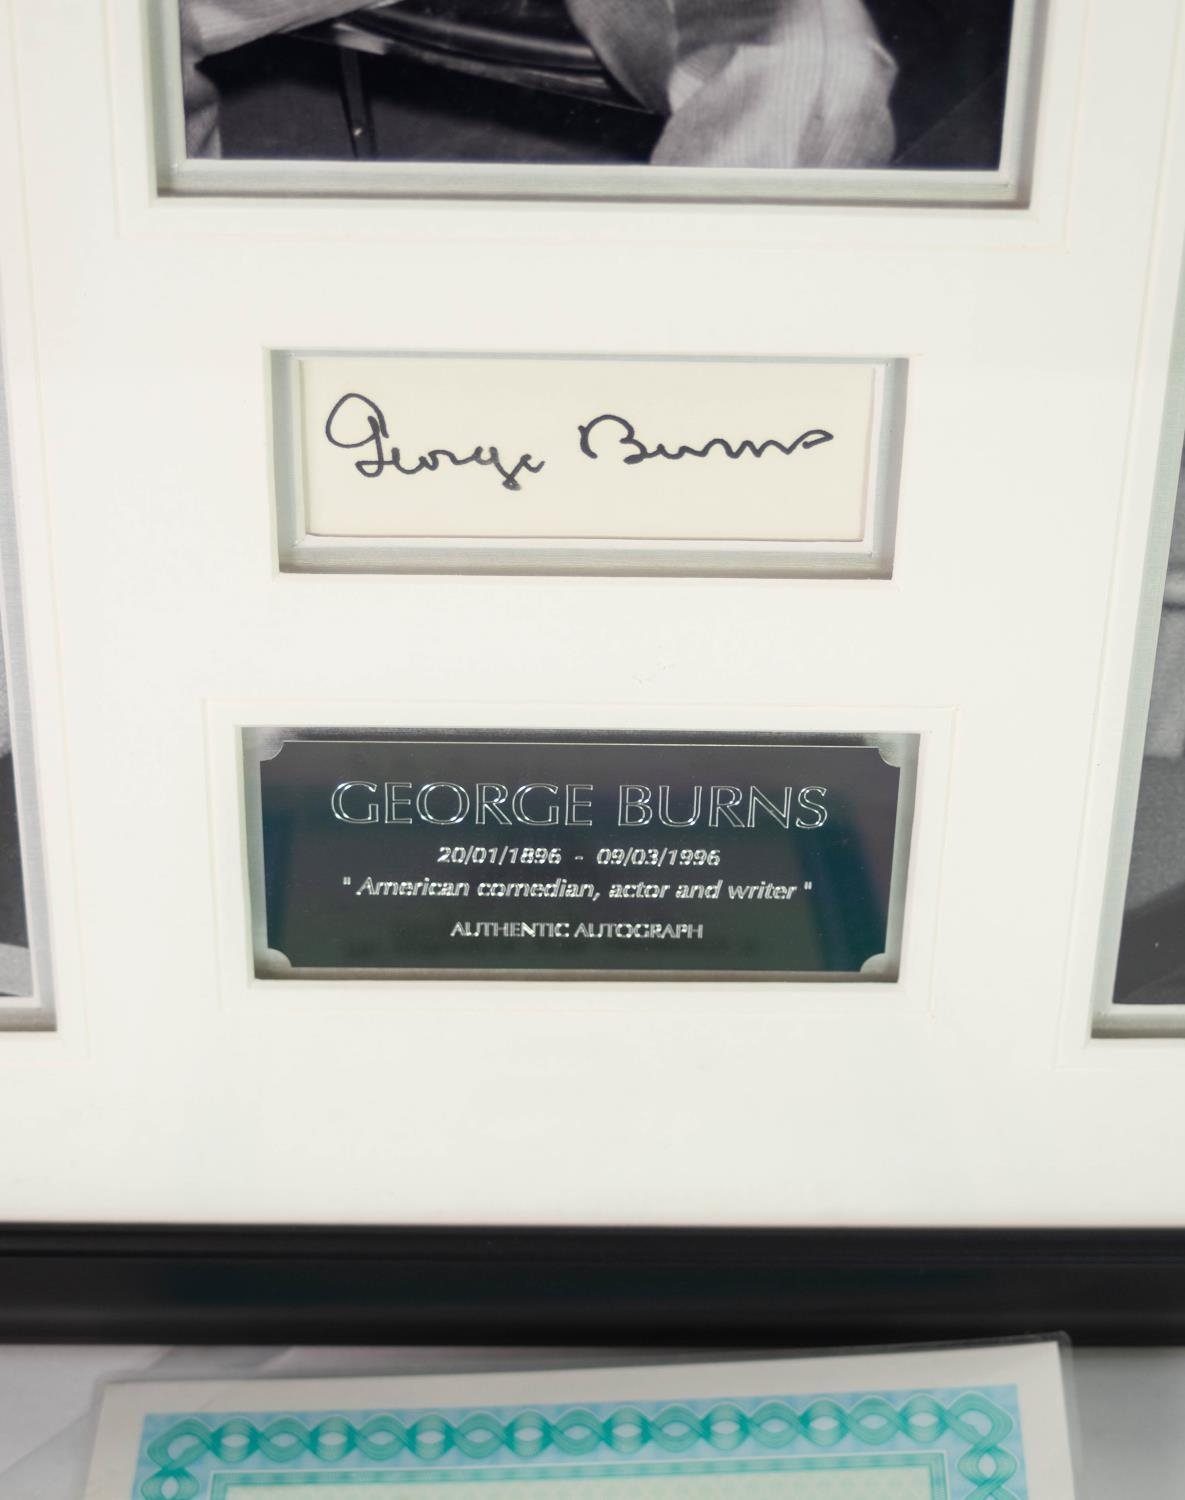 GEORGE BURNS - AMERICAN COMEDIAN AND ACTOR AUTOGRAPH ON WHITE CARD, mounted as montage with three - Image 3 of 3